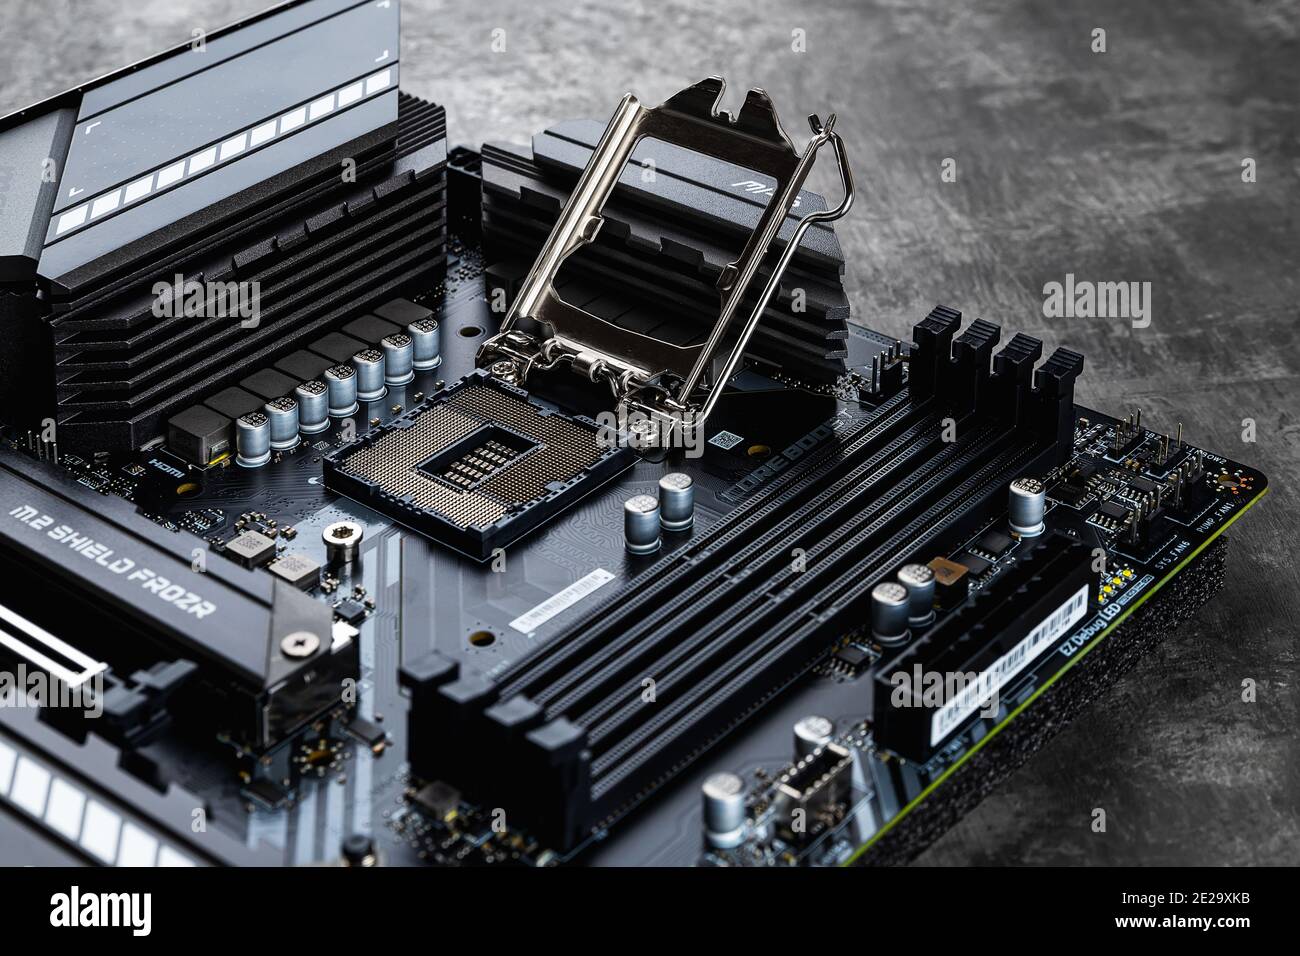 Varna, Bulgaria, January 08, 2021. MSI mag Z490 Tomahawk gaming motherboard with open CPU socket lever on a dark background. Modern pc hardware Stock Photo - Alamy